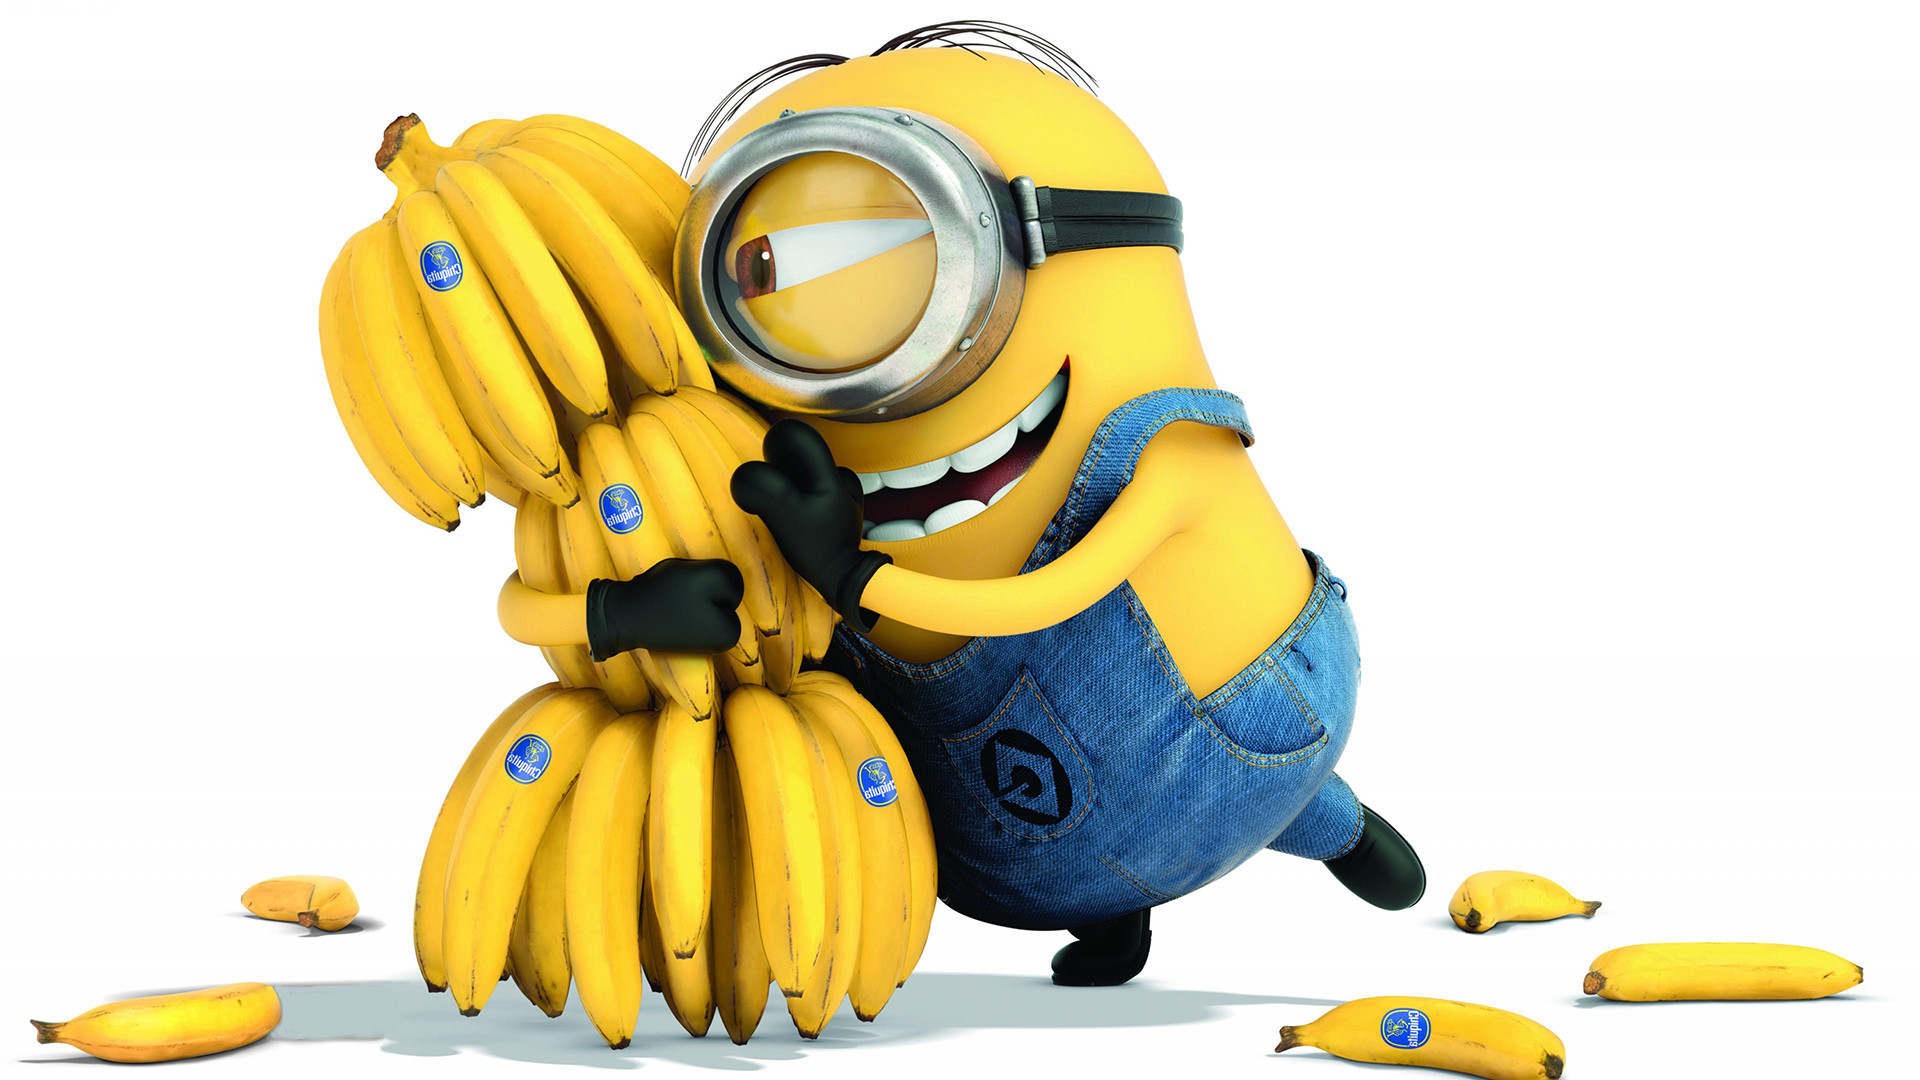 1920x1080 Minions Movie HD Wallpapers - HD Wallpapers Backgrounds of Your Choice